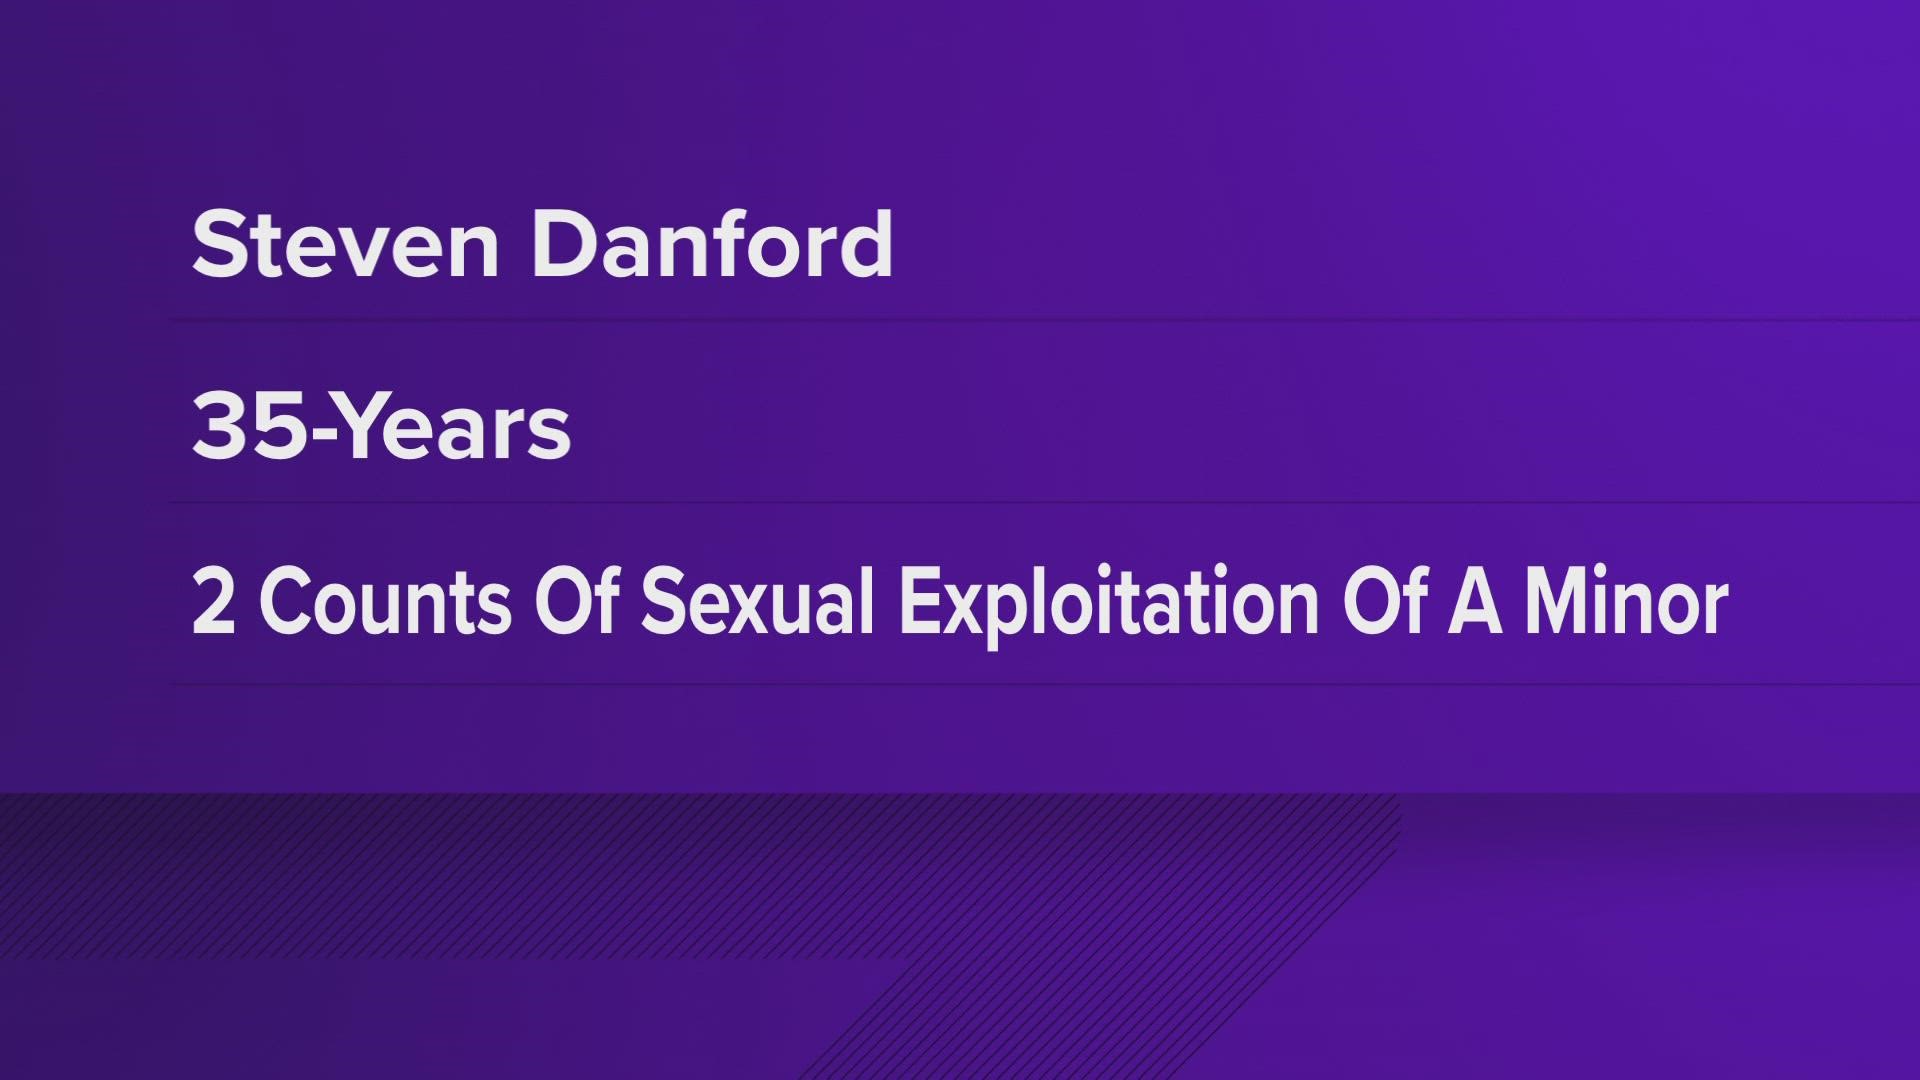 Steven Danford pleaded guilty to 2 counts of sexual exploitation of a minor and attempted sexual exploitation of a minor.